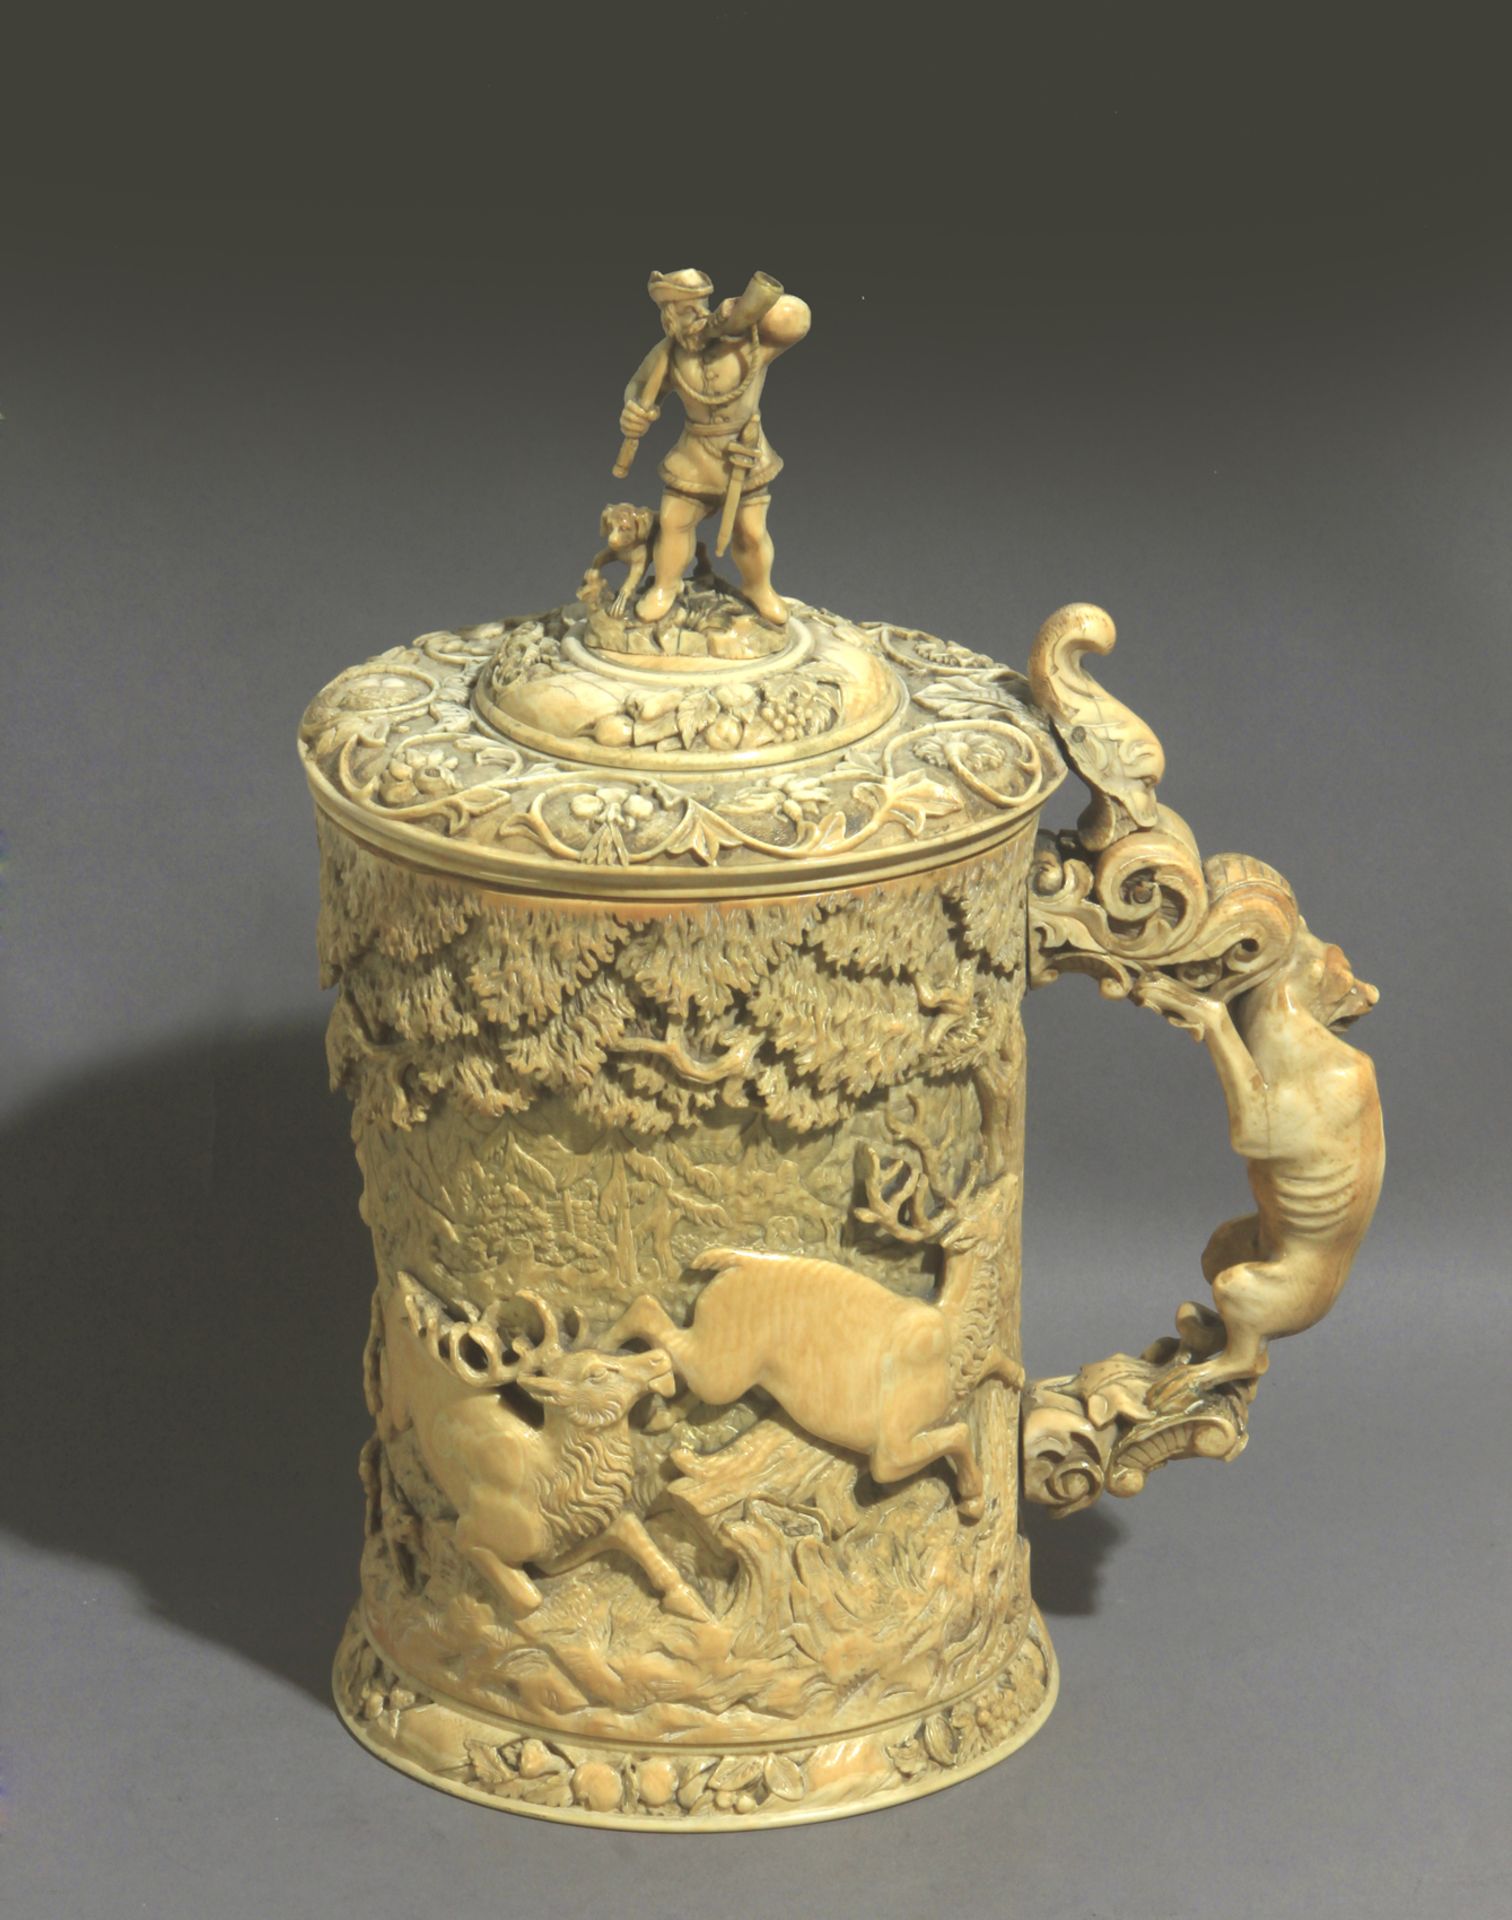 Early 18th century possibly German tankard